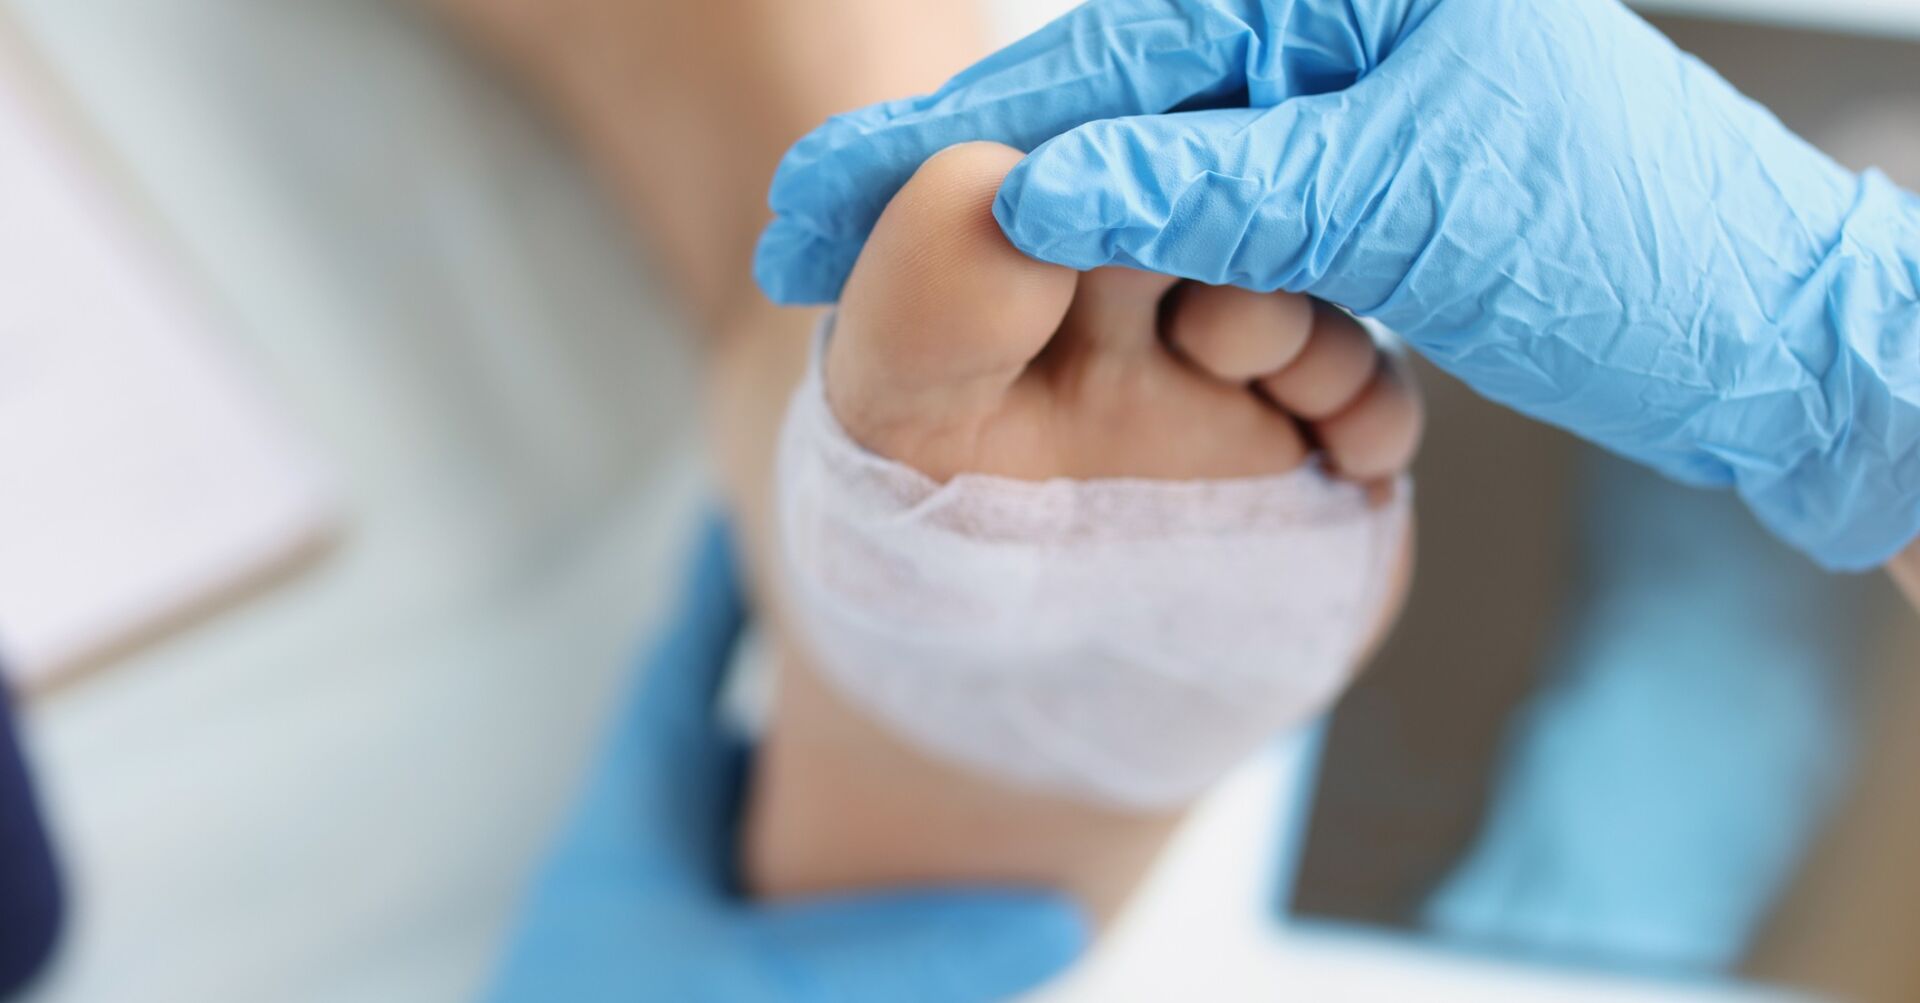 General practice pressures adding to wound care priority issues, report finds